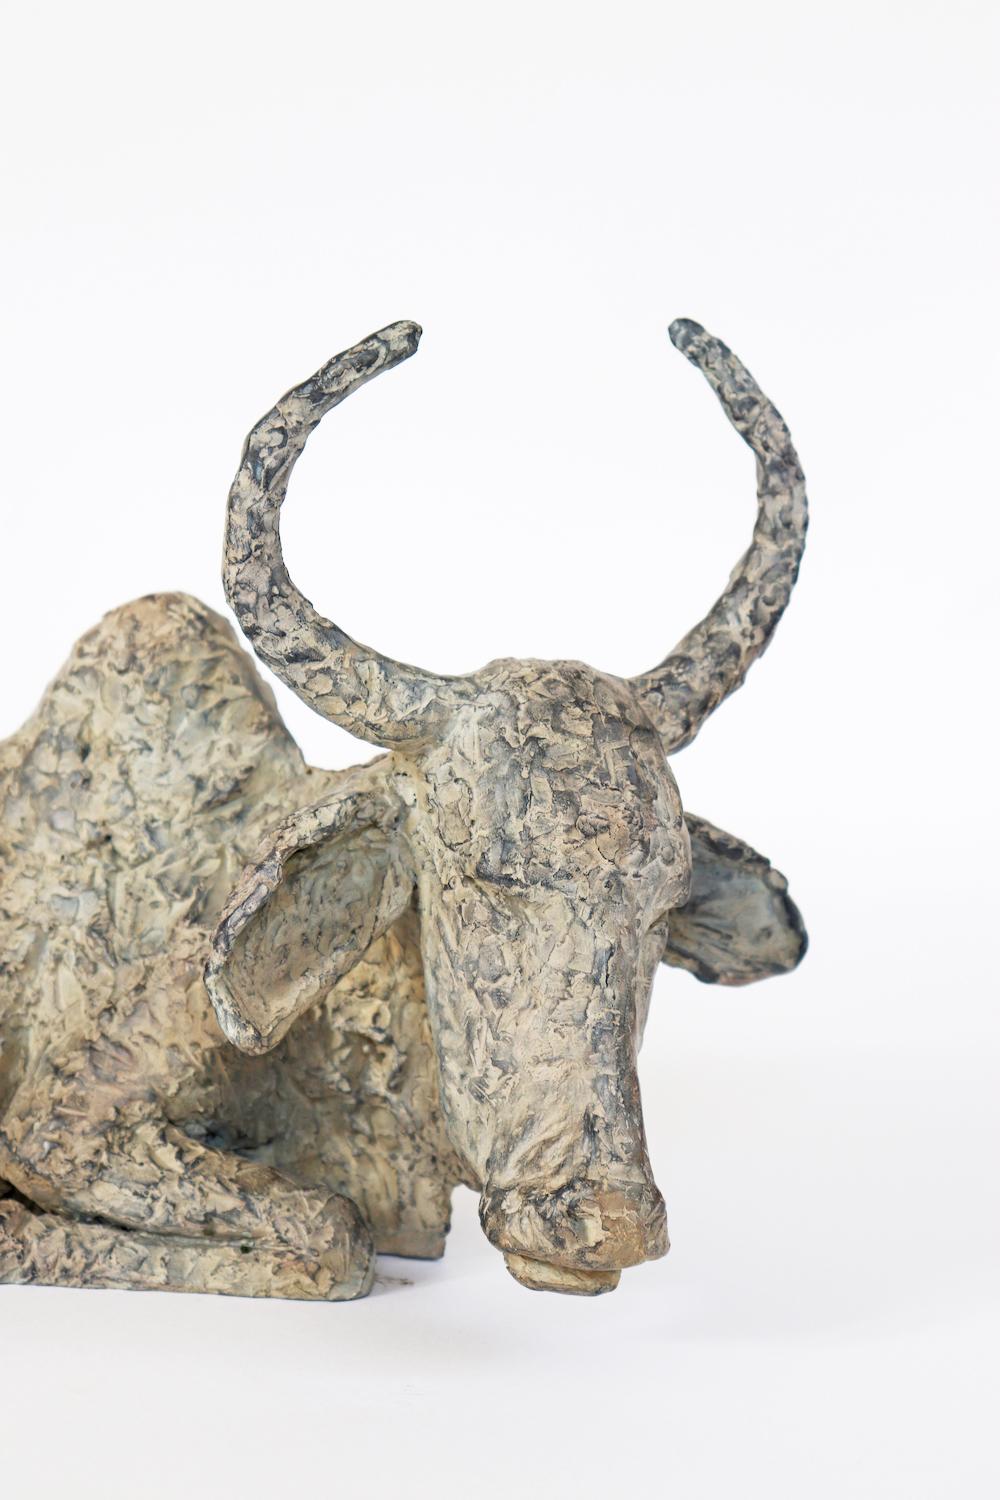 Holy Cow by Marine de Soos - Animal bronze sculpture, India For Sale 2